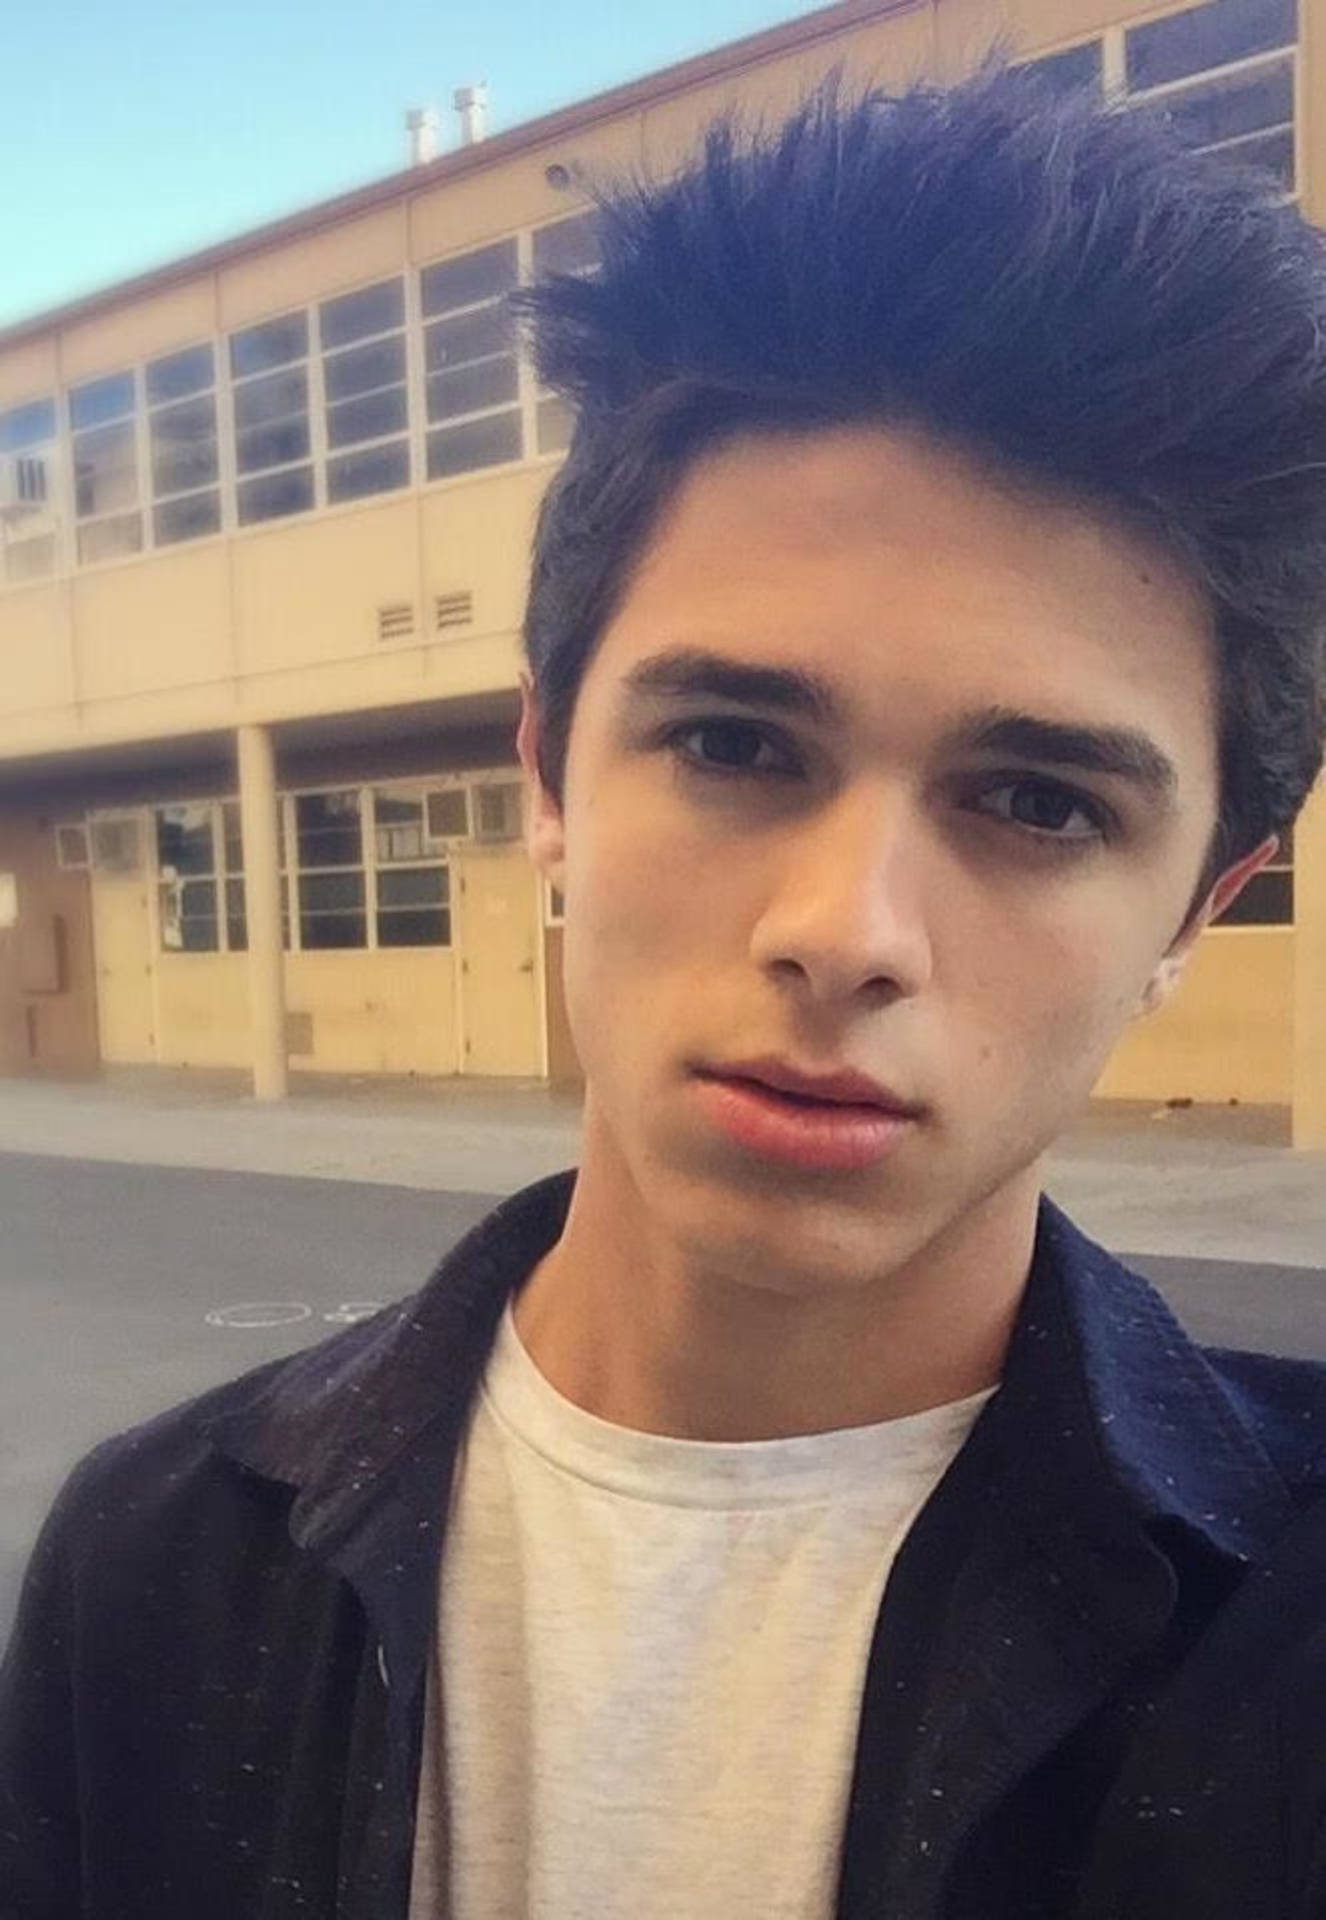 Vibrant Photo Of Brent Rivera Leaning Against A Building. Background